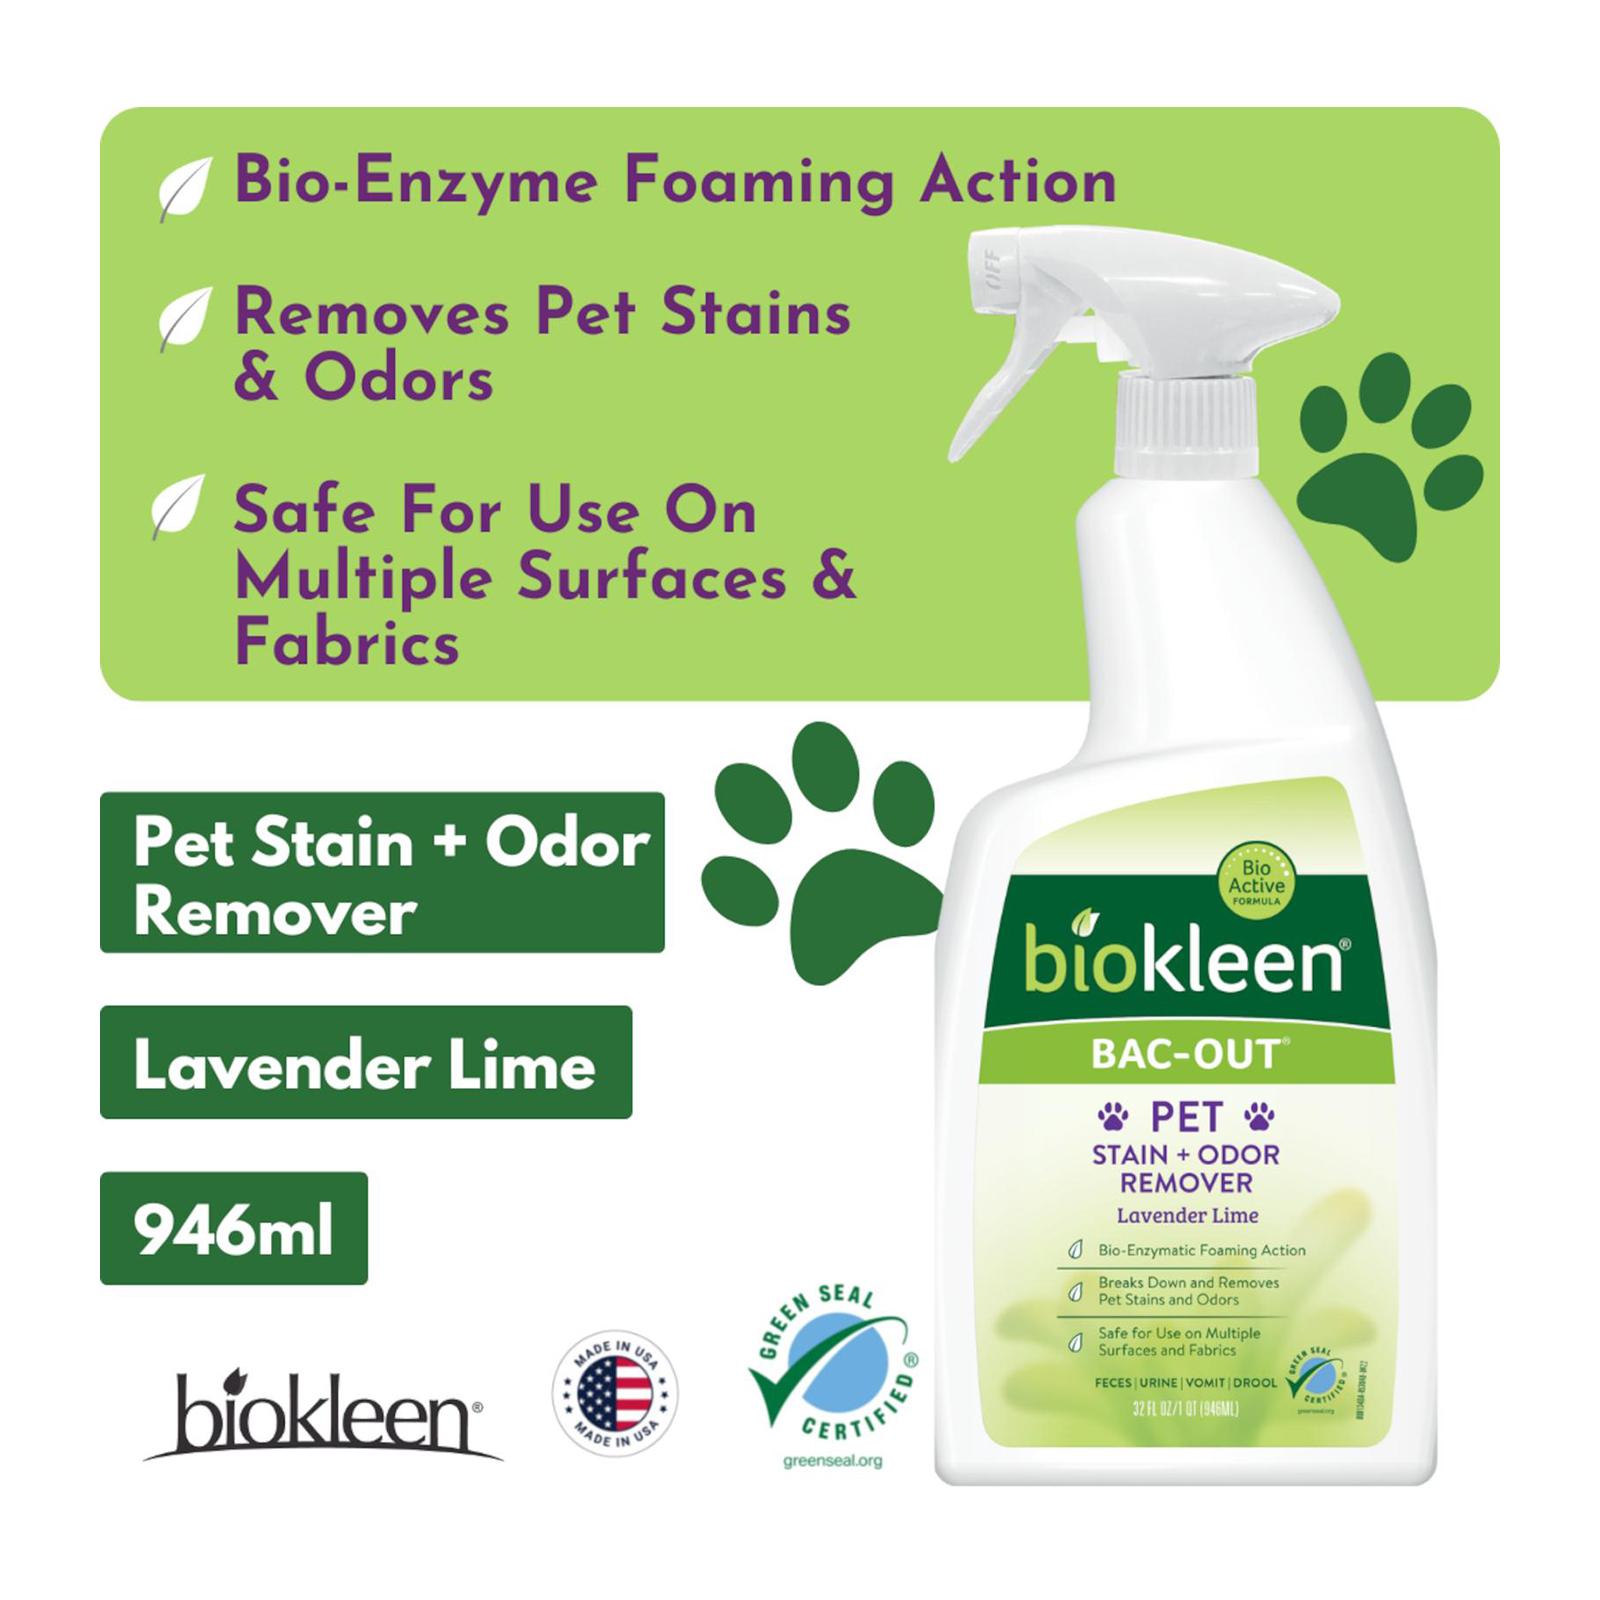 Biokleen Bac-Out Stain Odor Remover 32fl oz Natural Enzymatic Foam- Lime  Essence